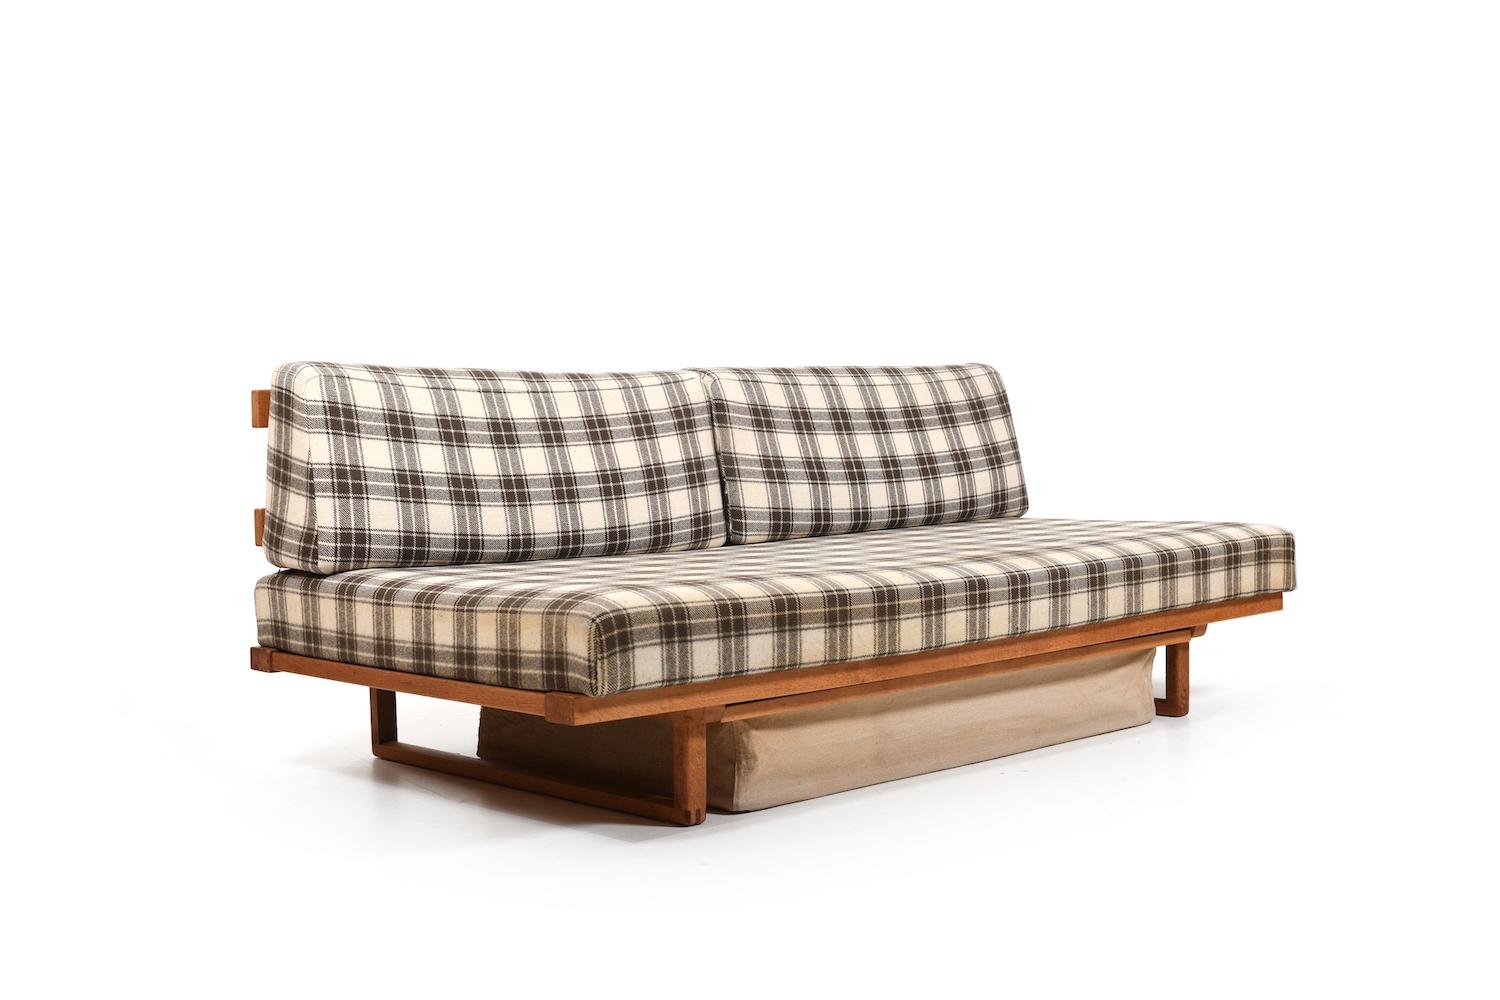 Daybed, model 4312 by Børge Mogensen for Fredericia Stolefabrik. Made in solid oak. Original cushion and upholstery. Undeneath with rarely offered and original  bed box in oak and limen fabric. Designed 1958. Produced 1960s. If you are interested,